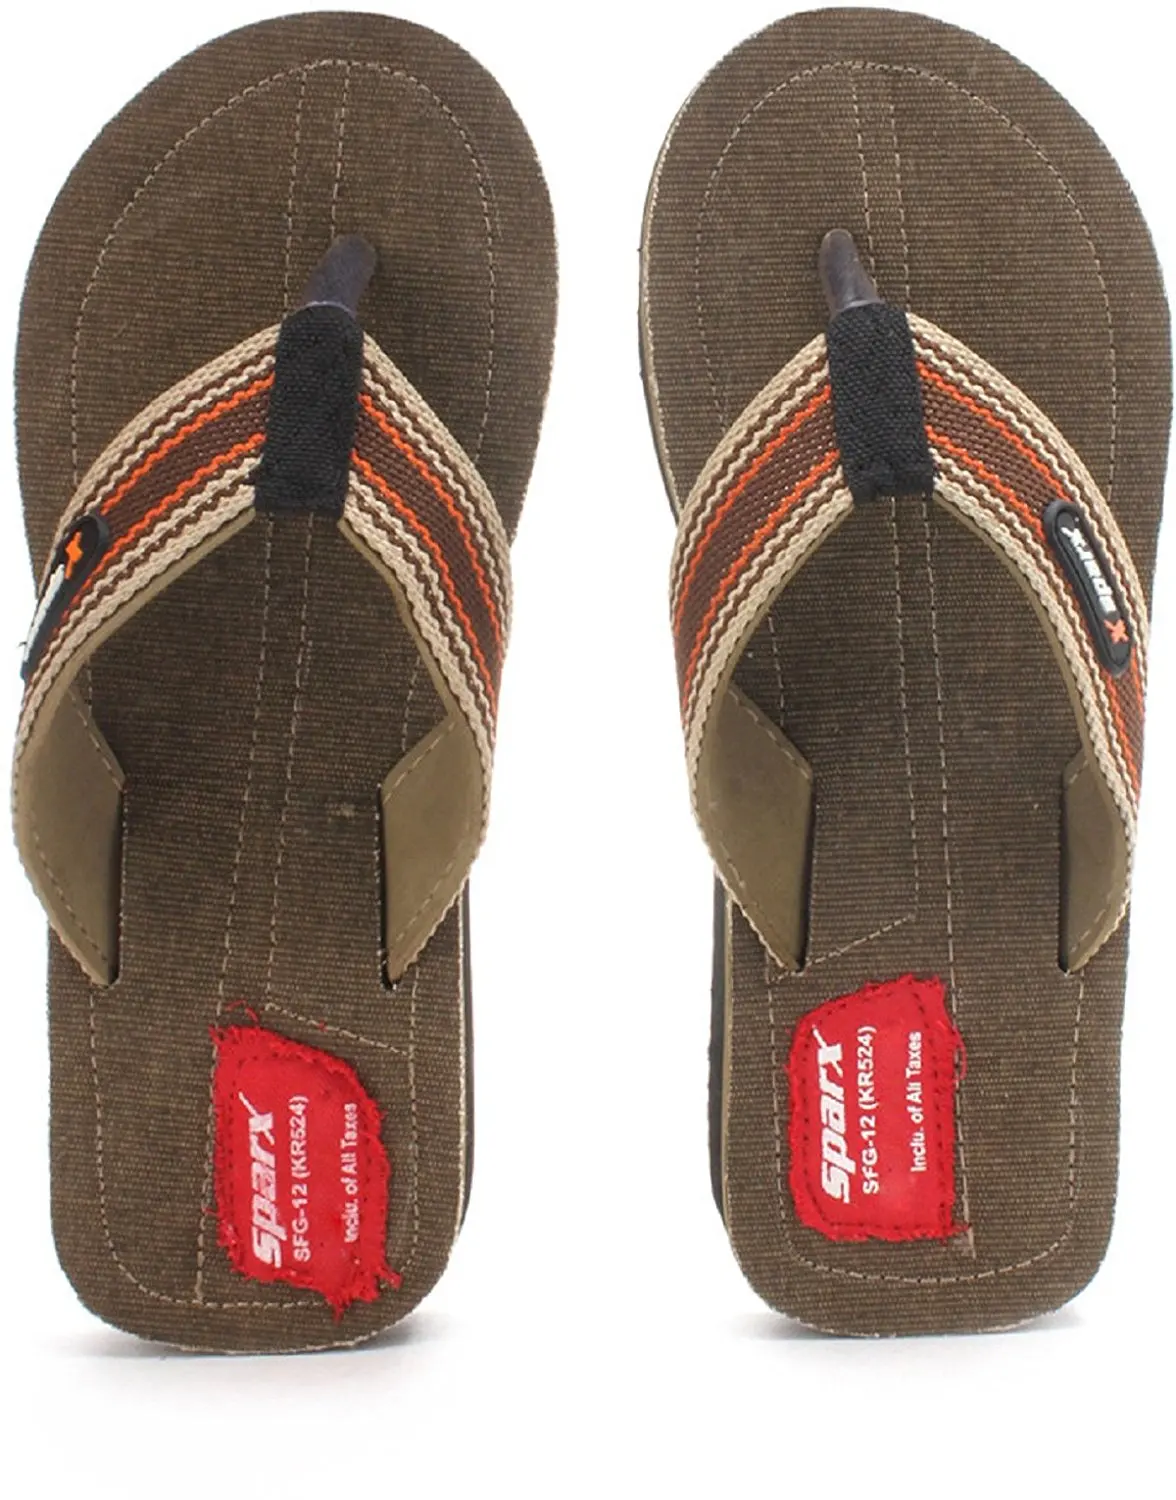 sparx slippers lowest price